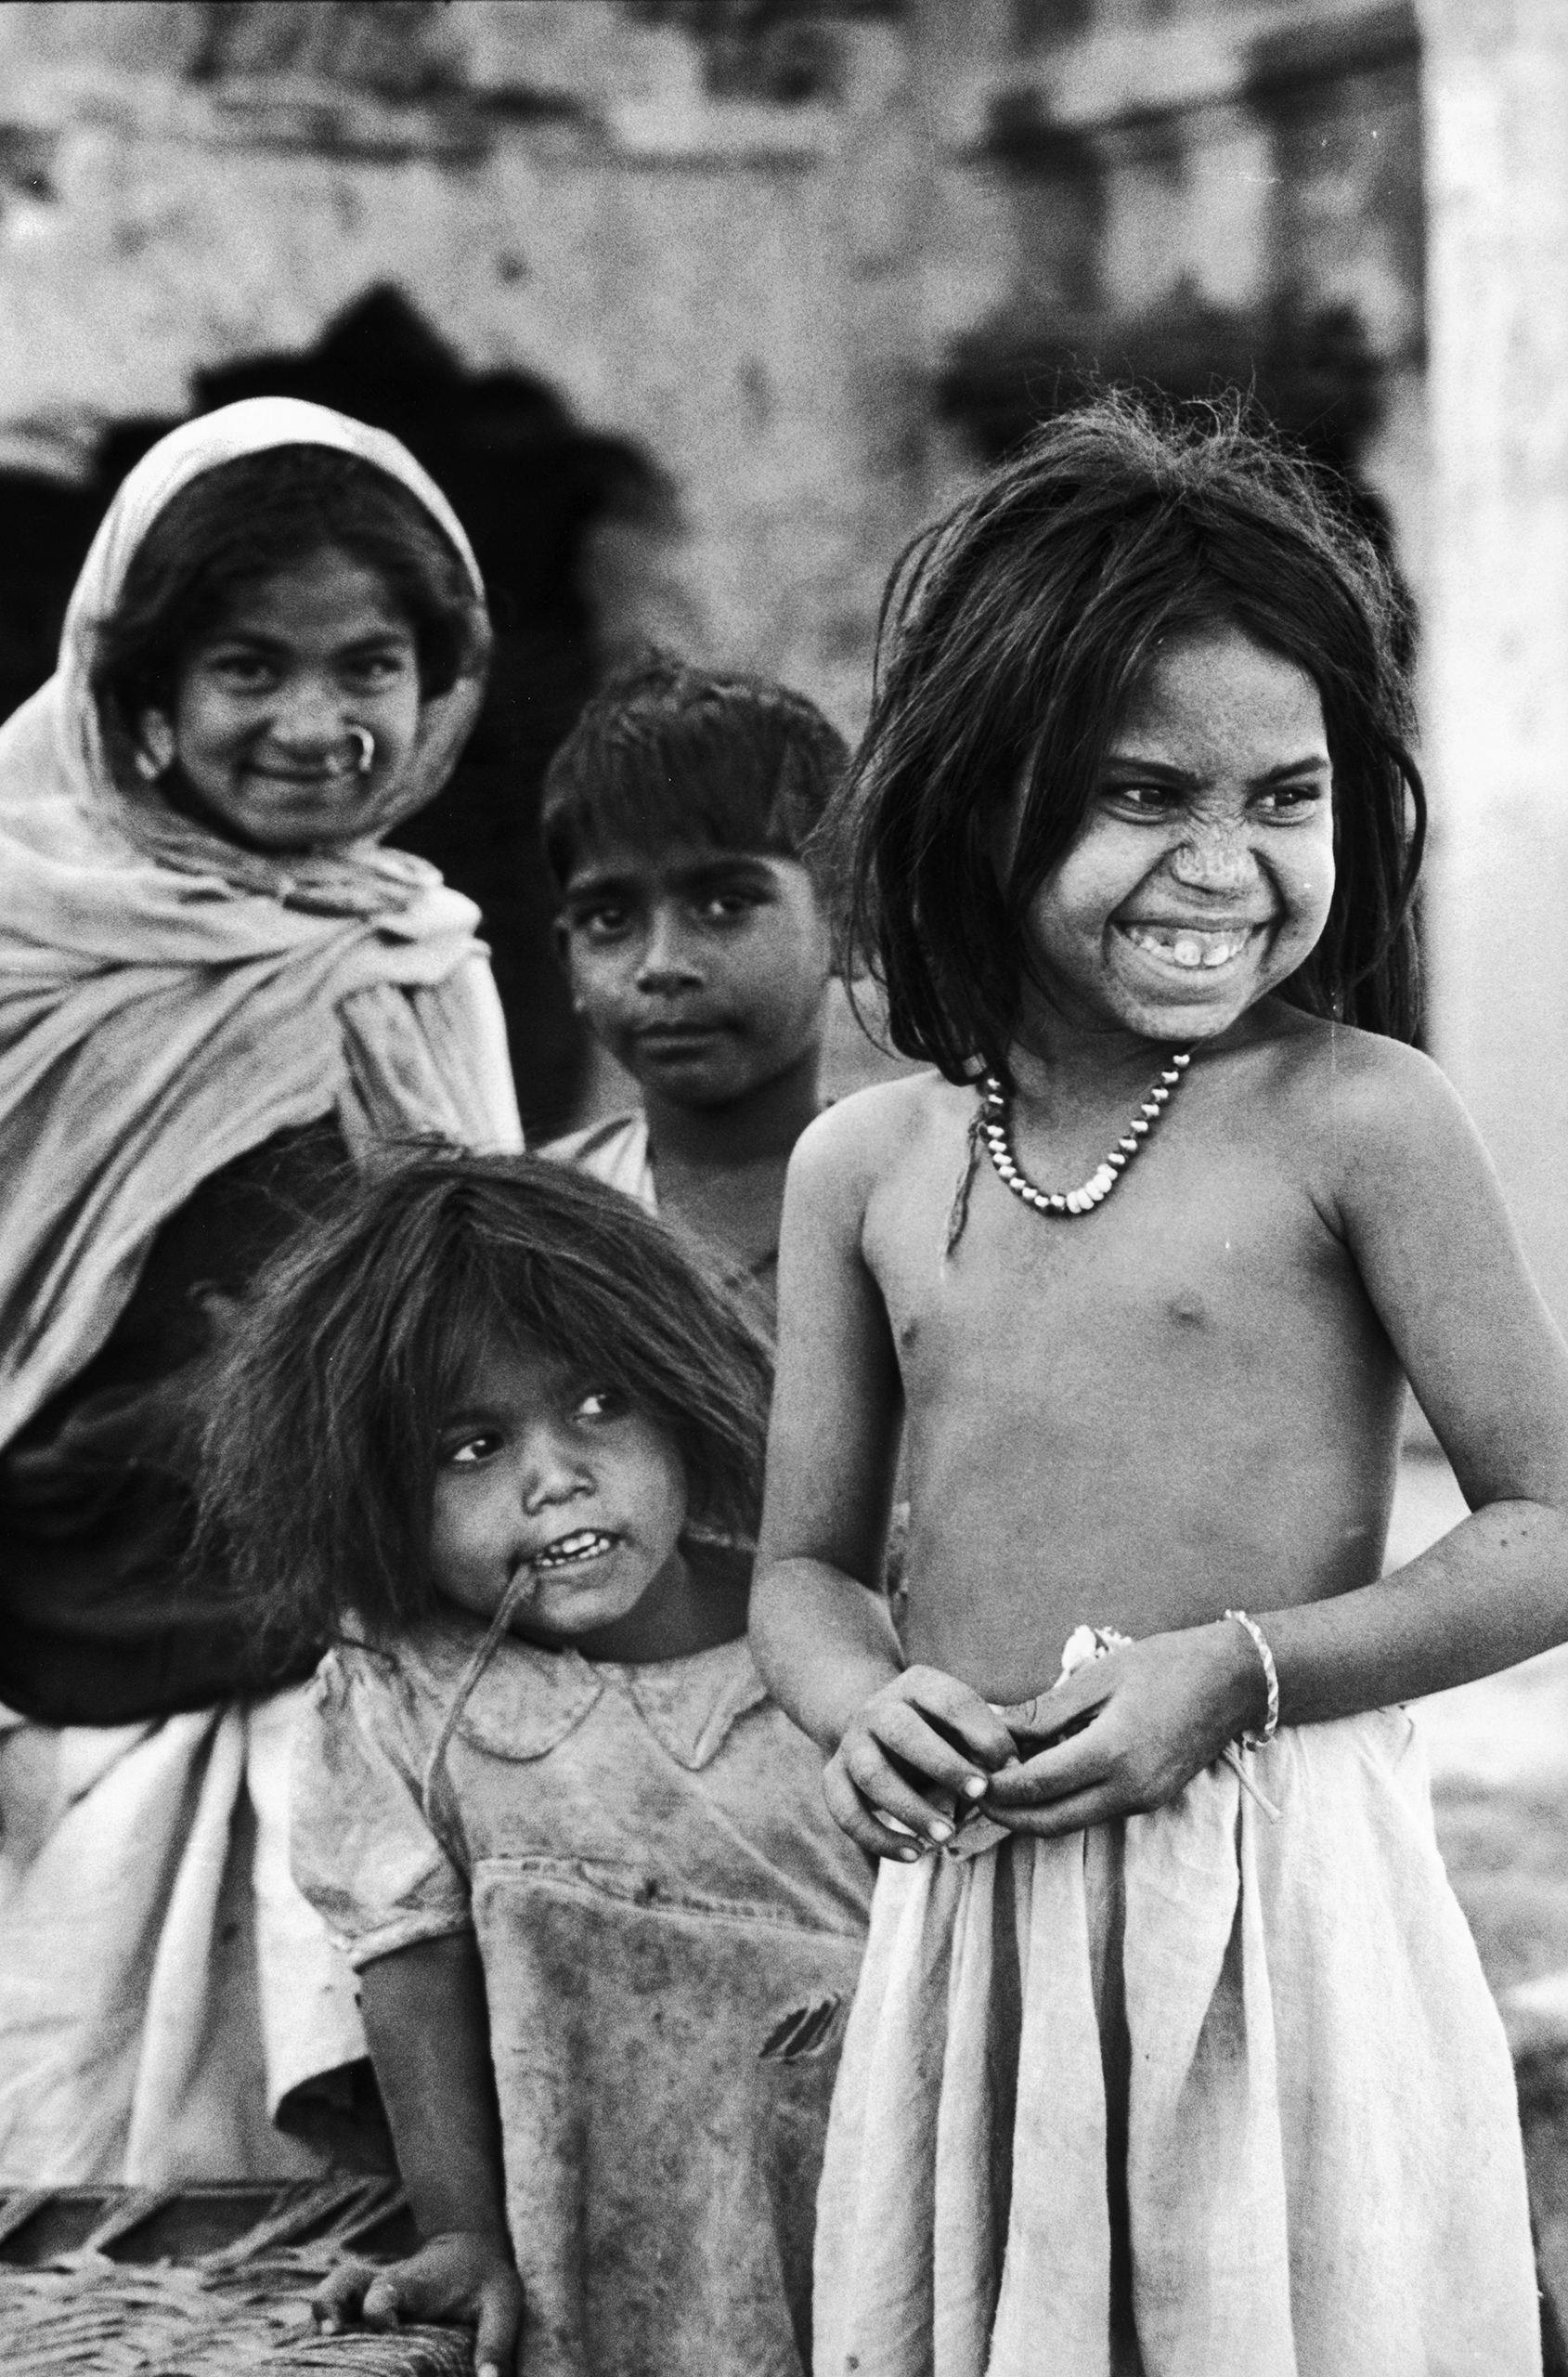 A group of children in India, 1963.